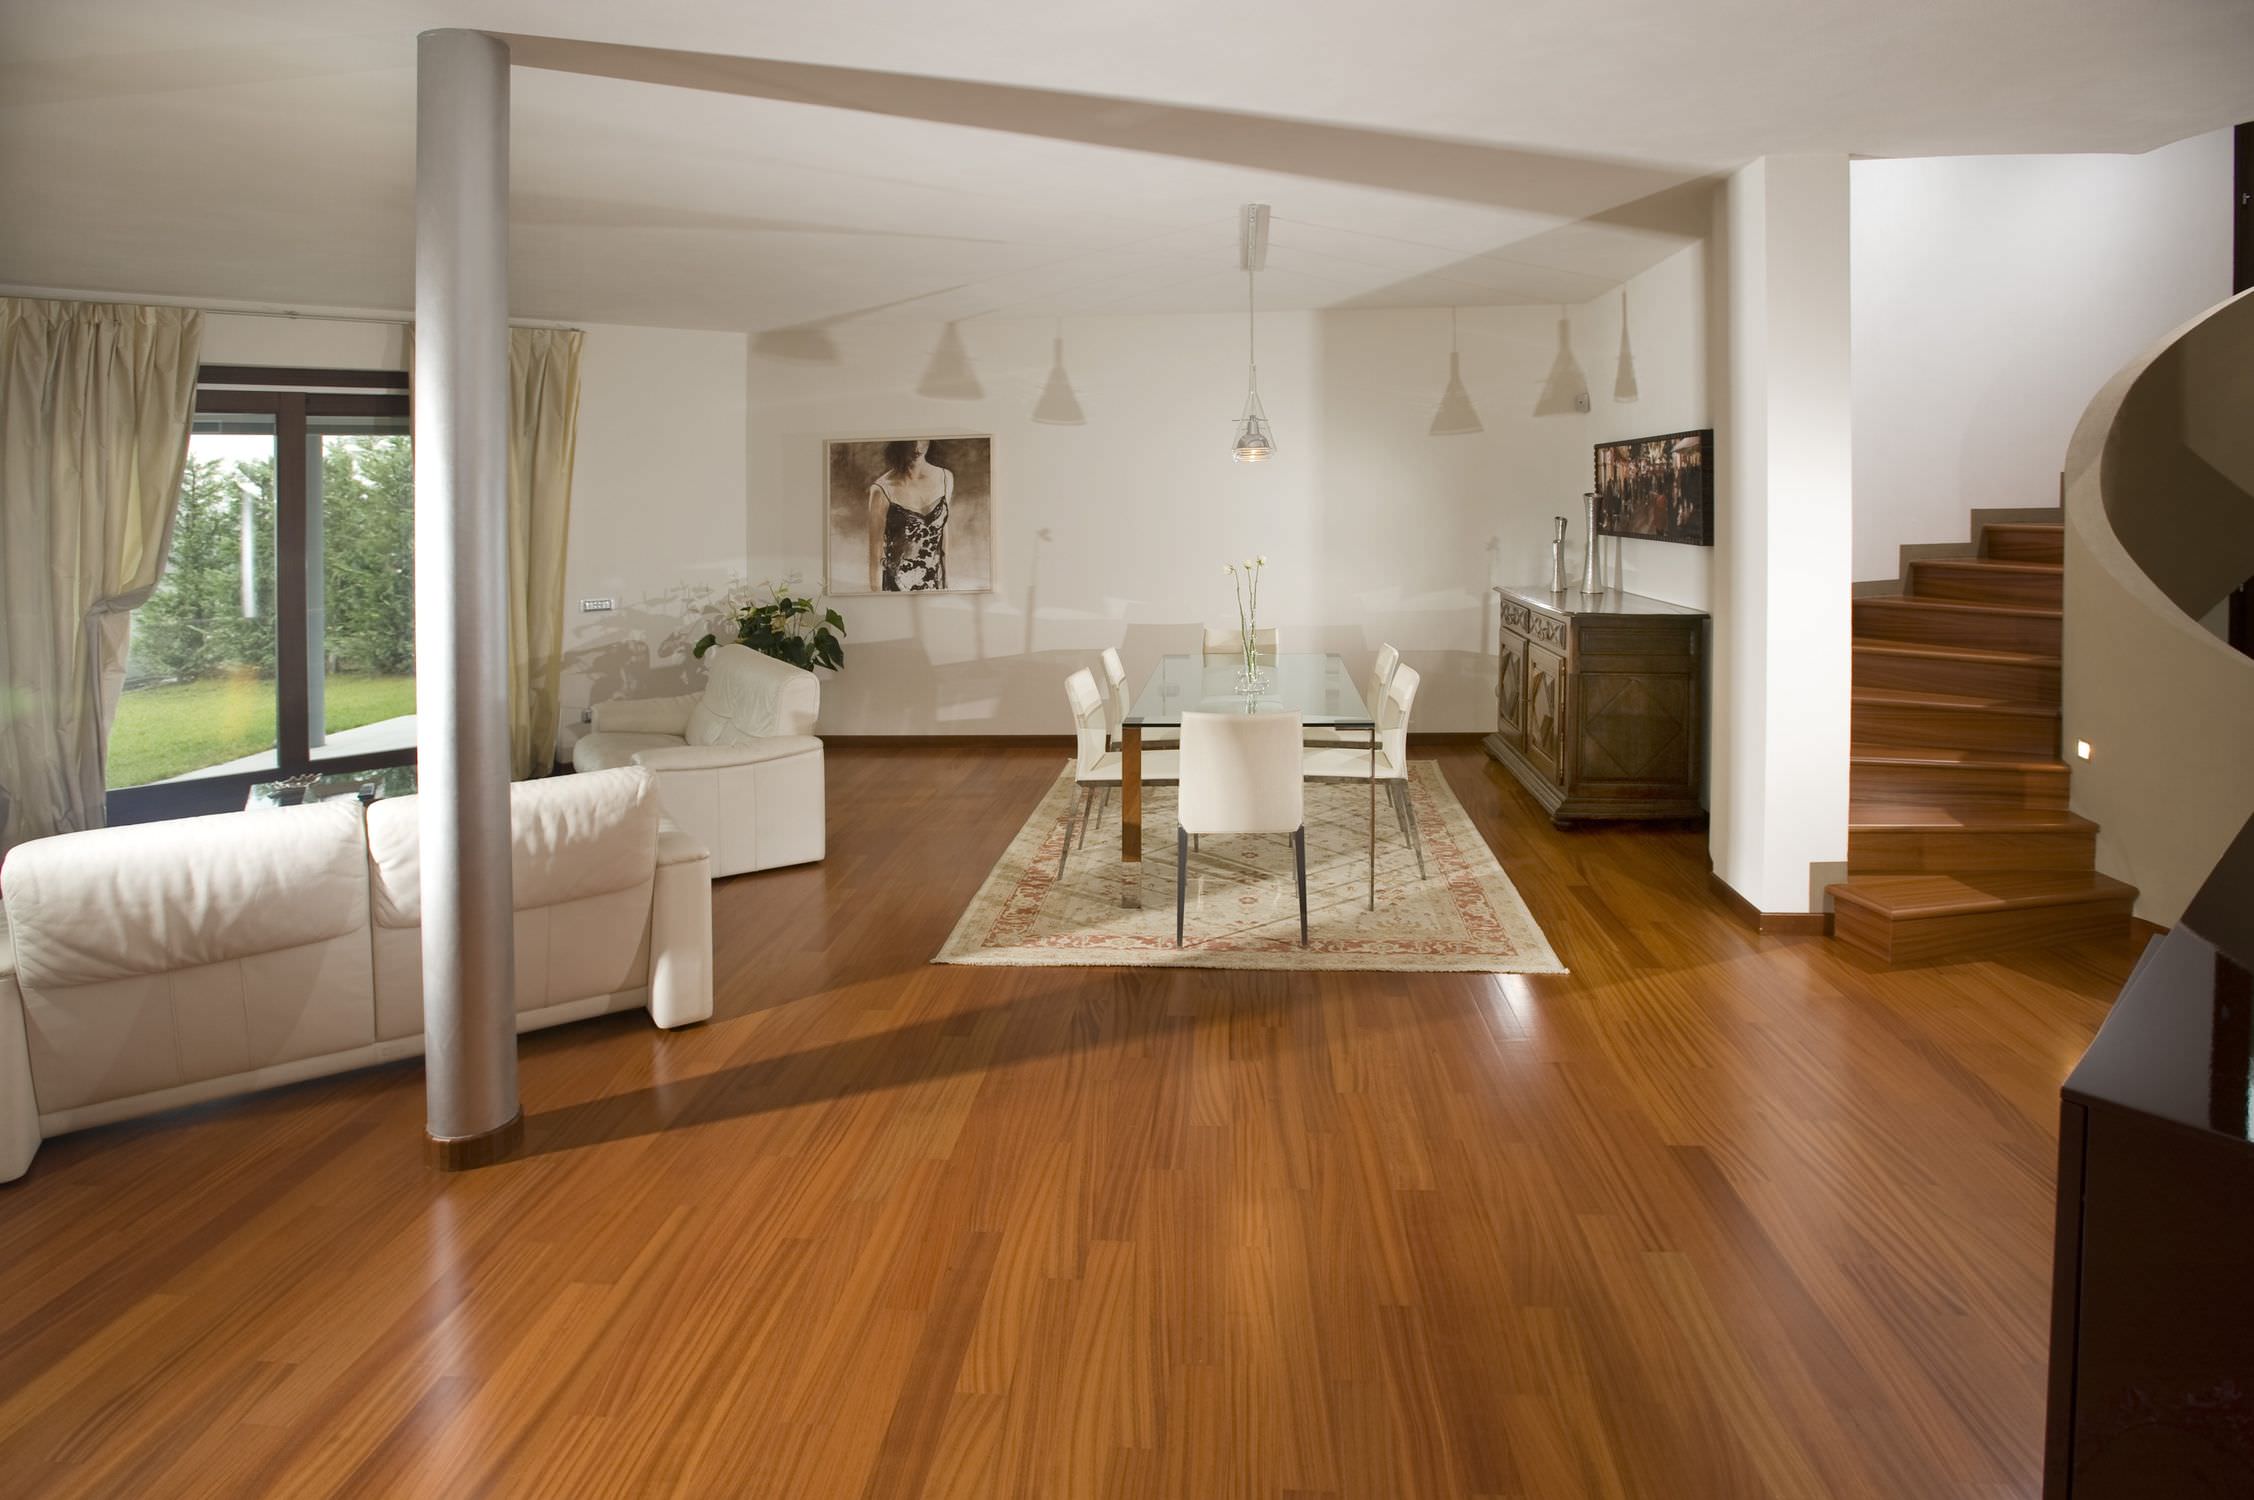 Interior Using Ideas Home Interior Using Open Flooring Ideas With Engineered Wood Flooring Style Completed With Modern Minimalist Furniture Interior Design Engineered Wood Flooring Is The Best Floor Materials